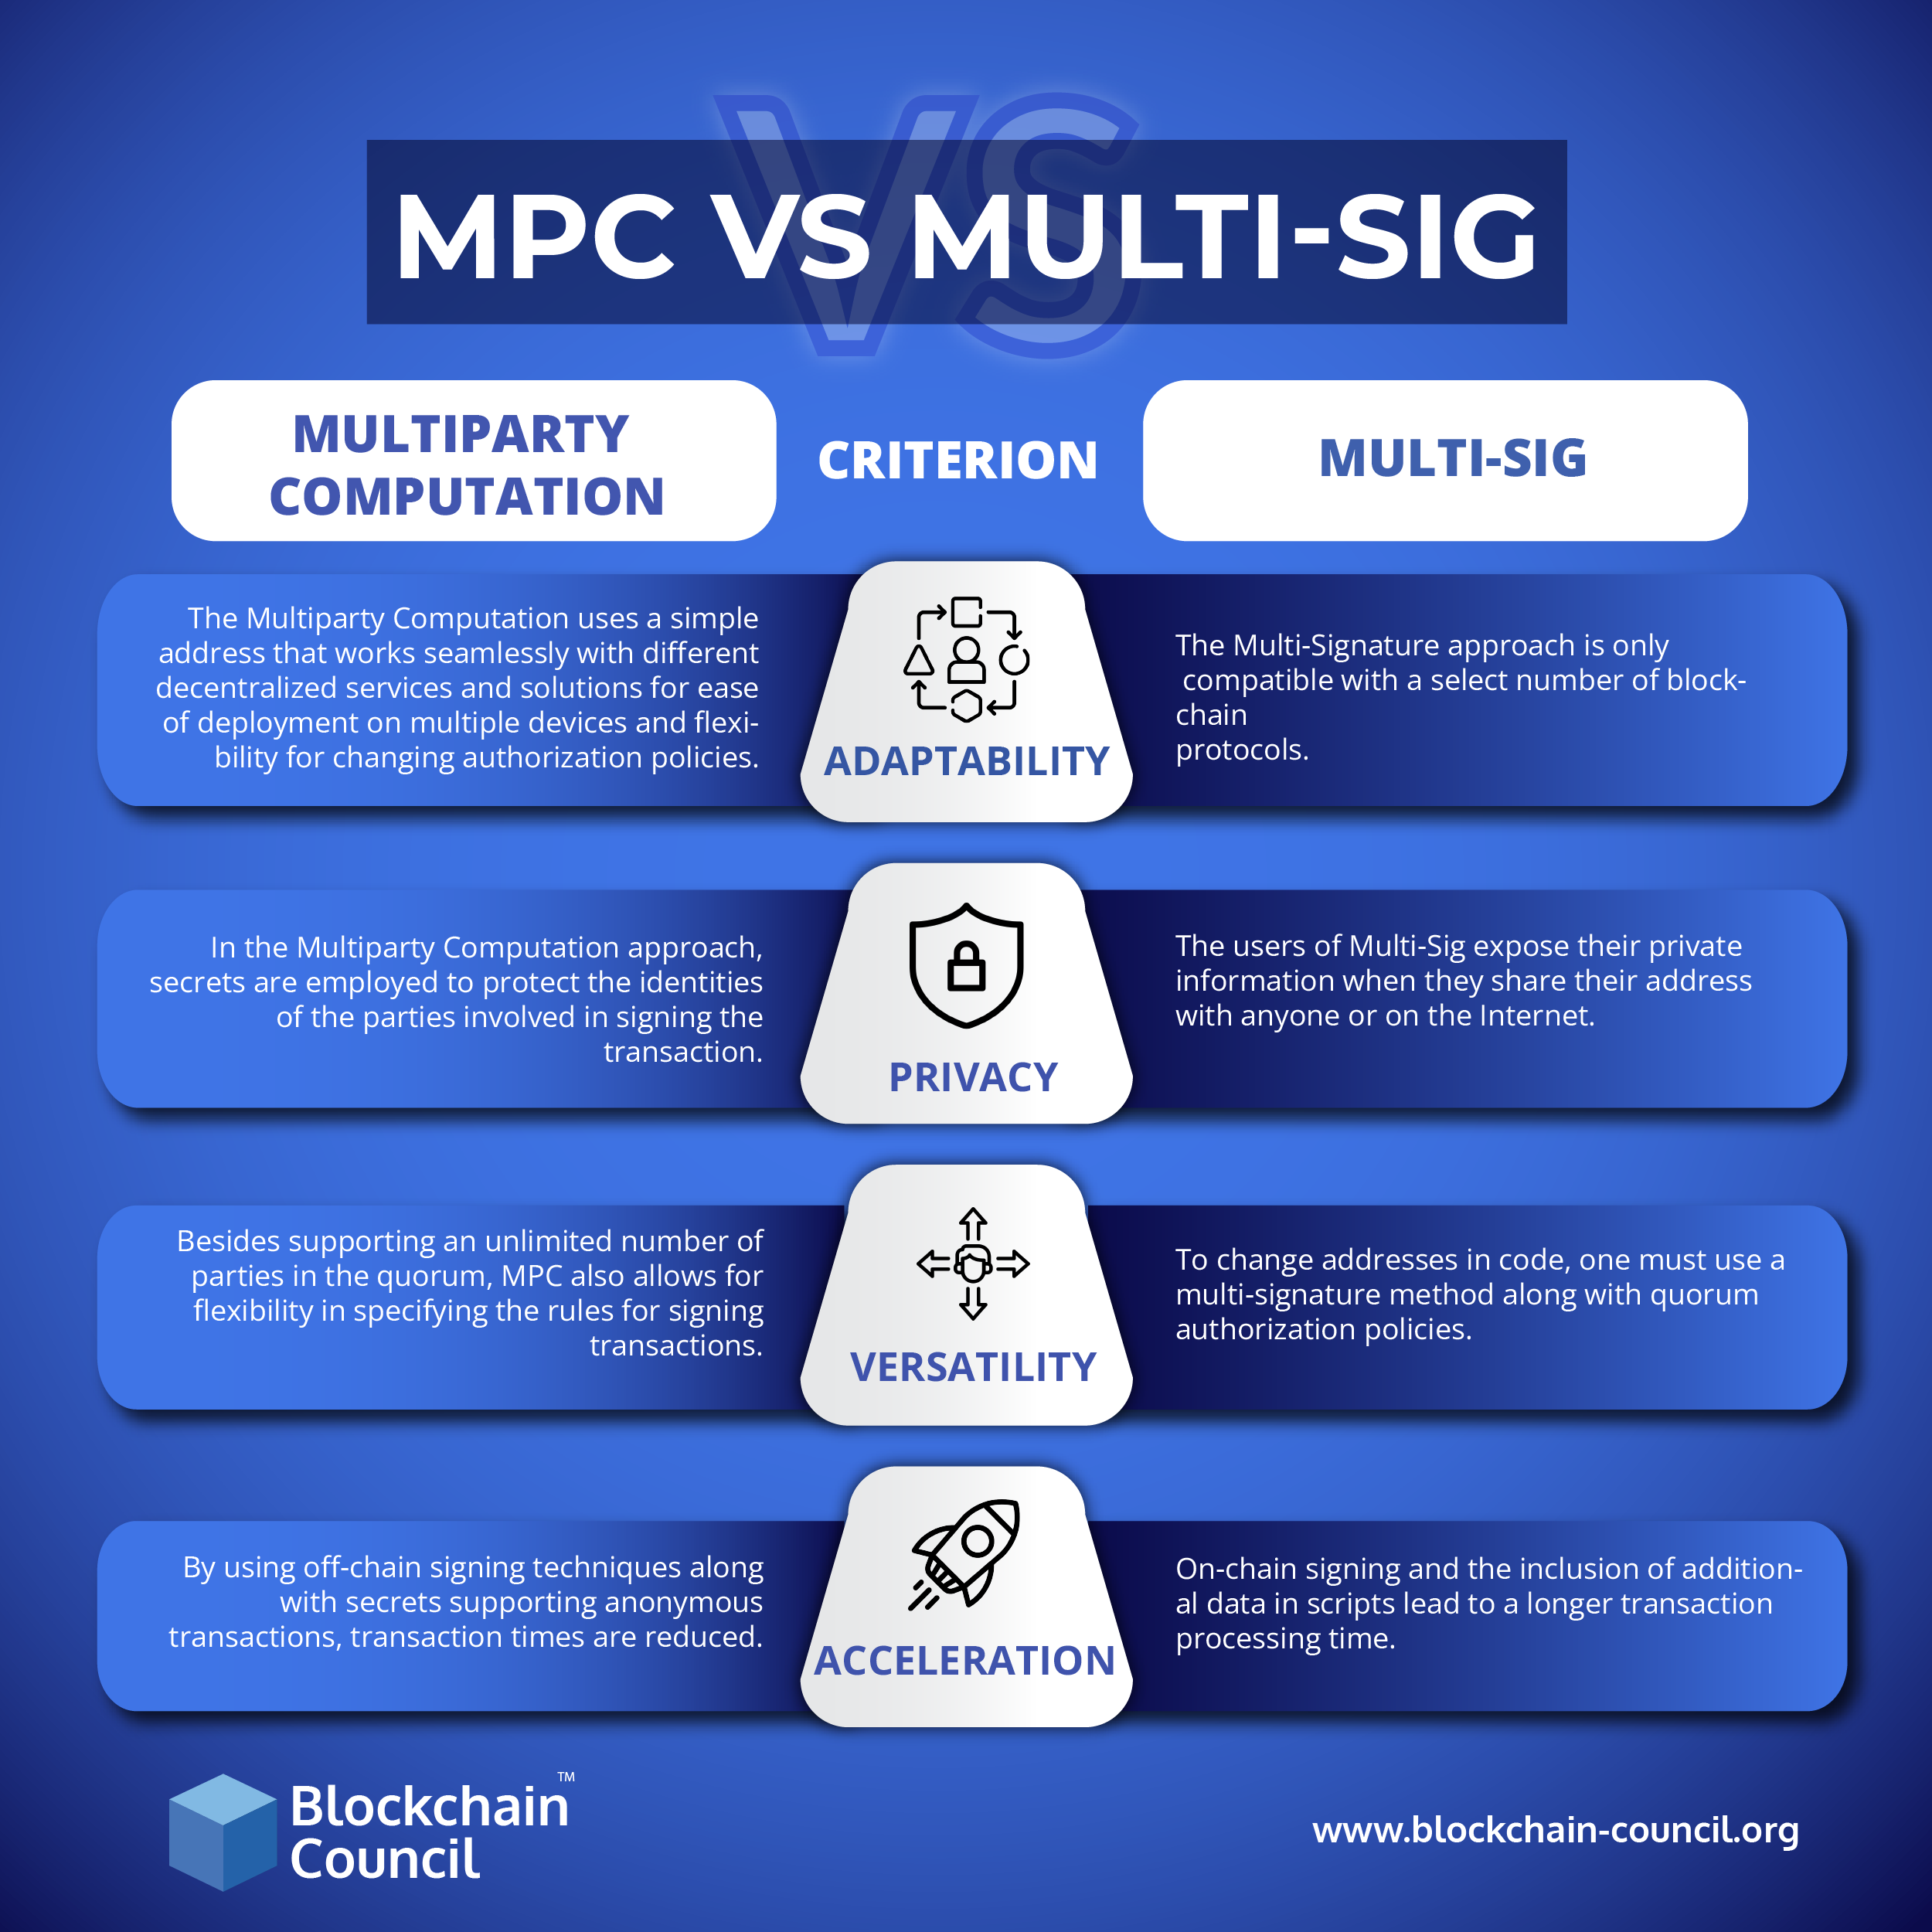 Multisig Wallets vs MPC Wallets, Where Do They Fit in the Grand